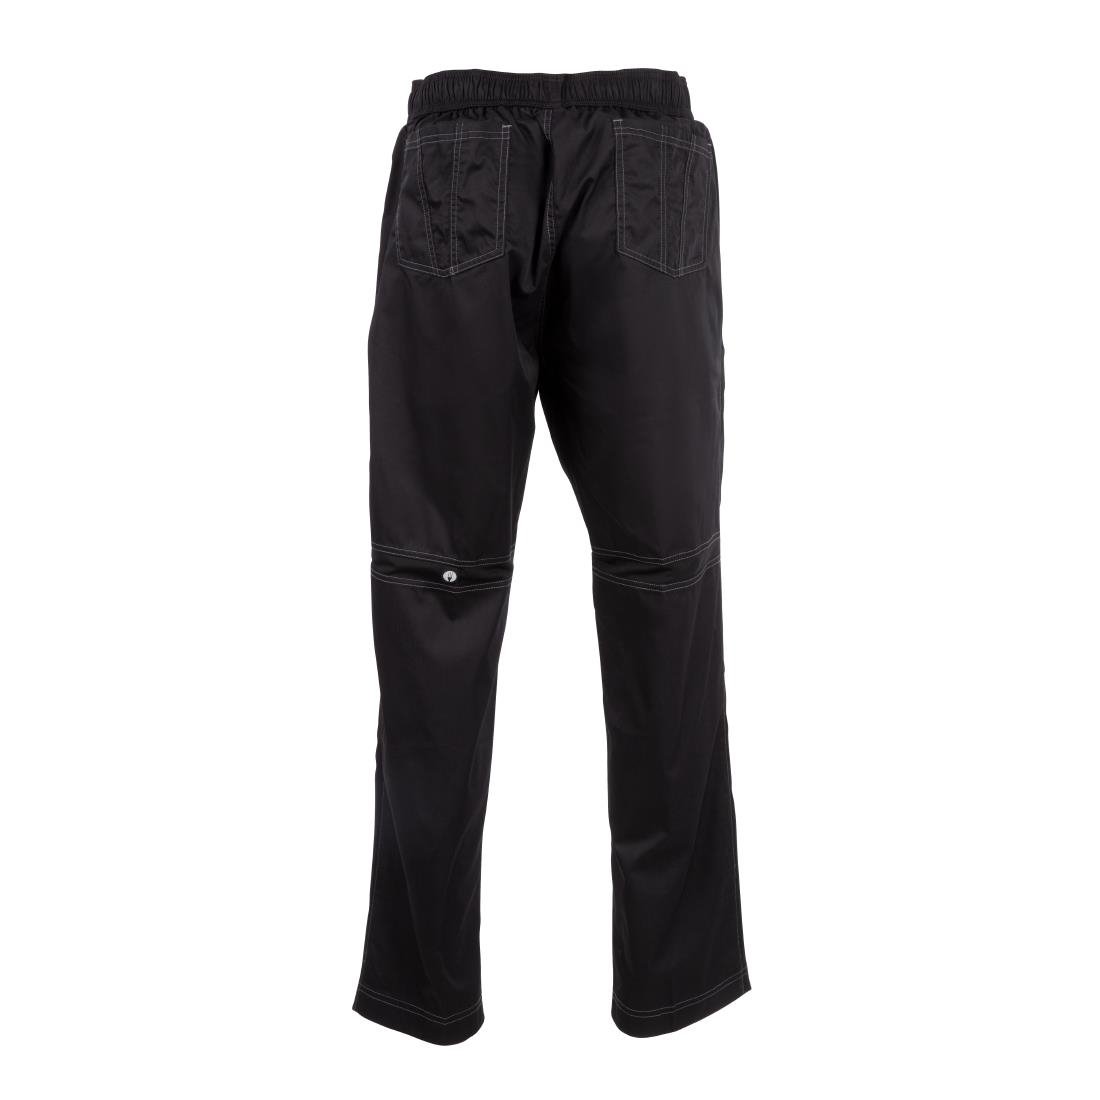 B187 Chef Works Unisex Cool Vent Baggy Chefs Trousers Black